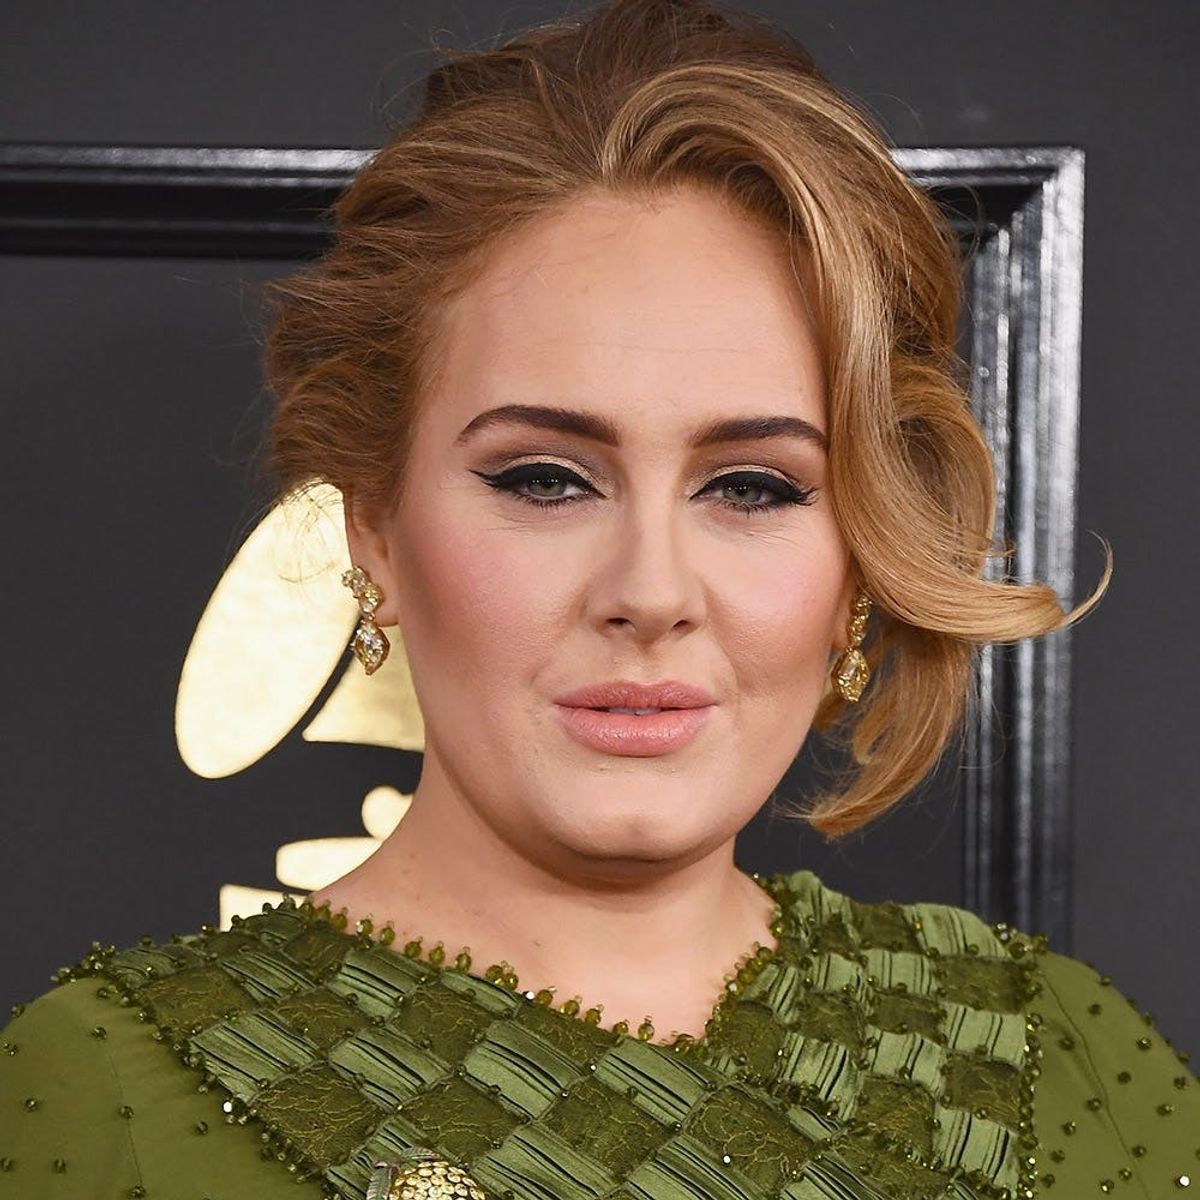 Here’s Every Makeup Product Used for Adele’s Grammys Beauty Look